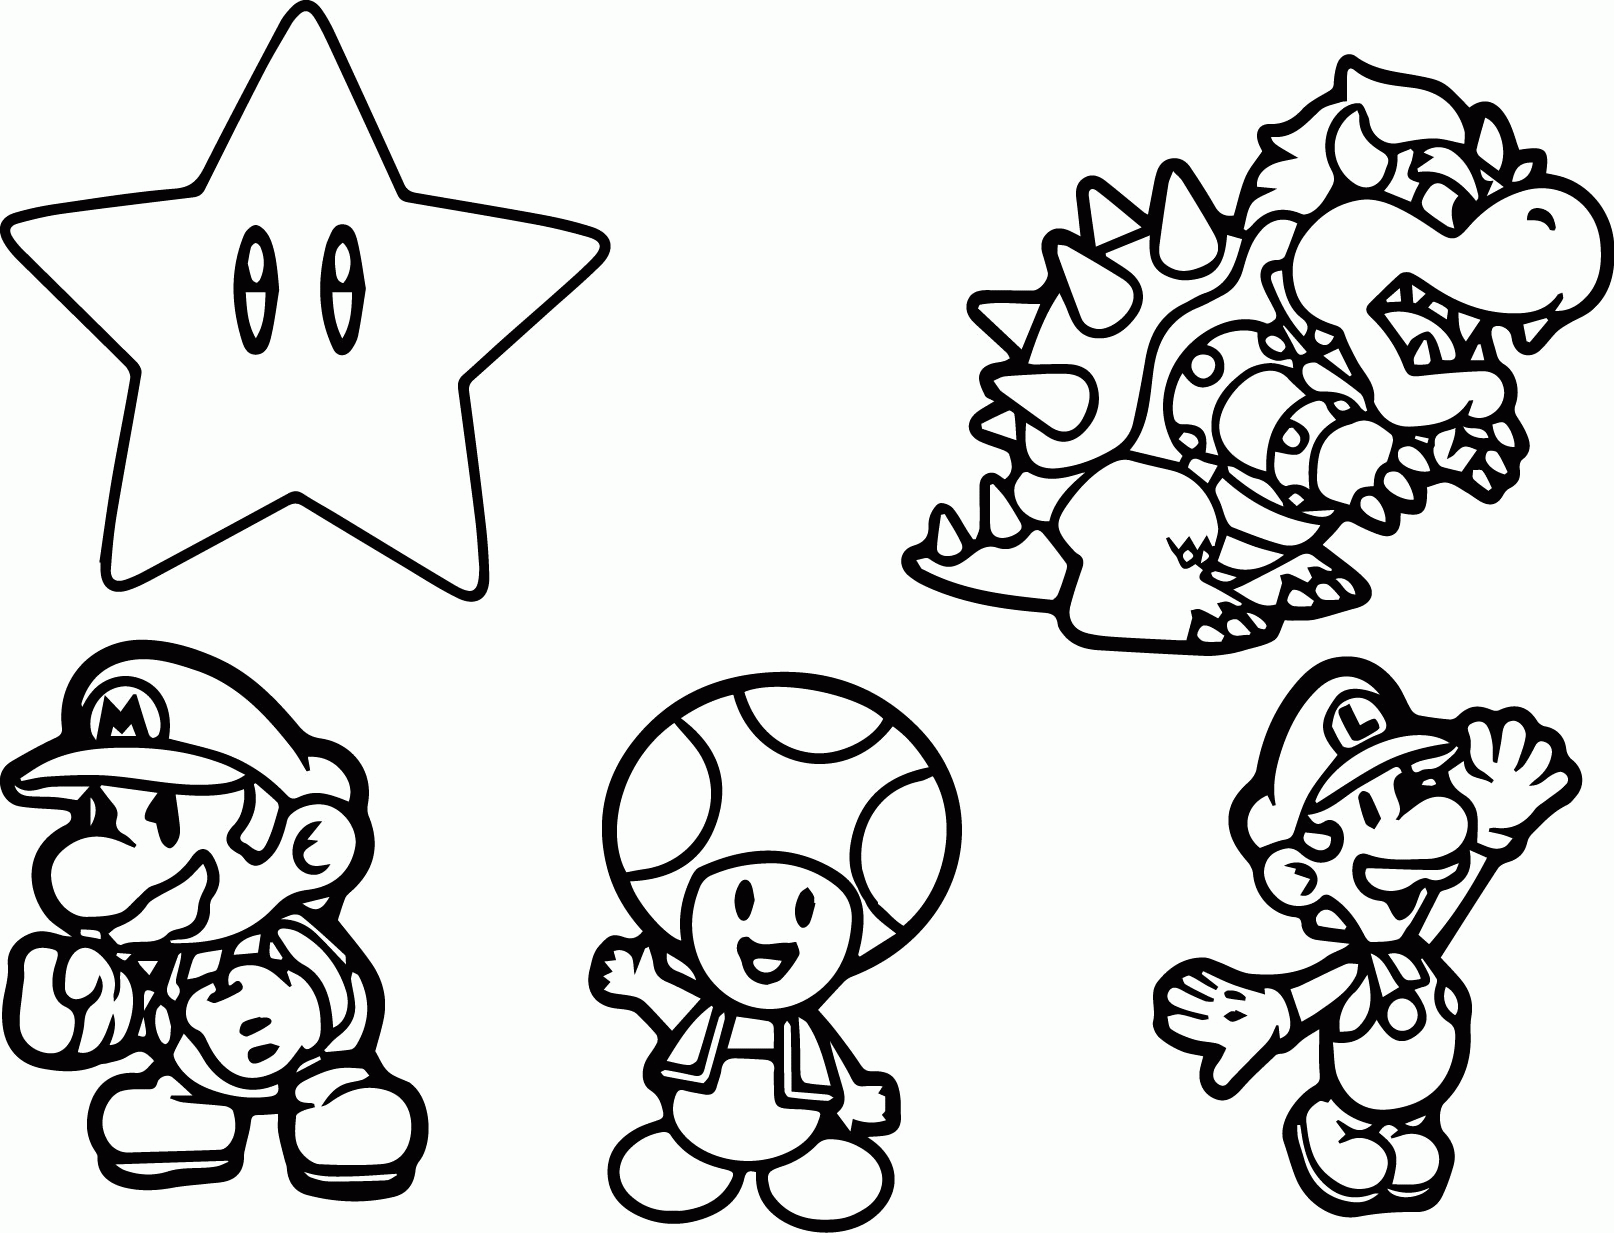 Super Mario Characters Coloring Pages | Wecoloringpage